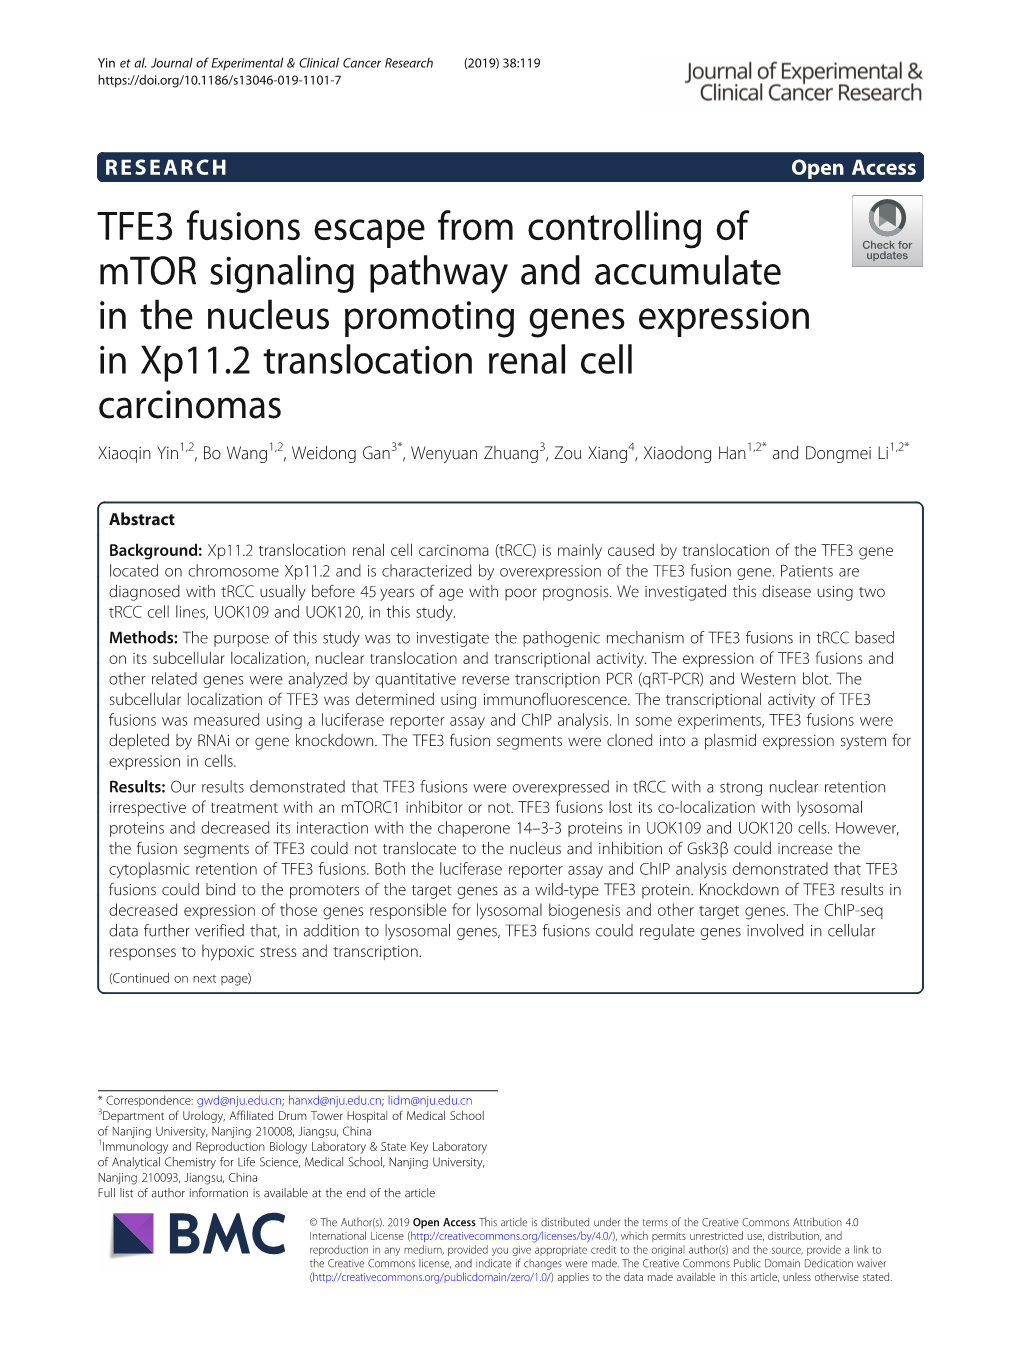 TFE3 Fusions Escape from Controlling of Mtor Signaling Pathway And